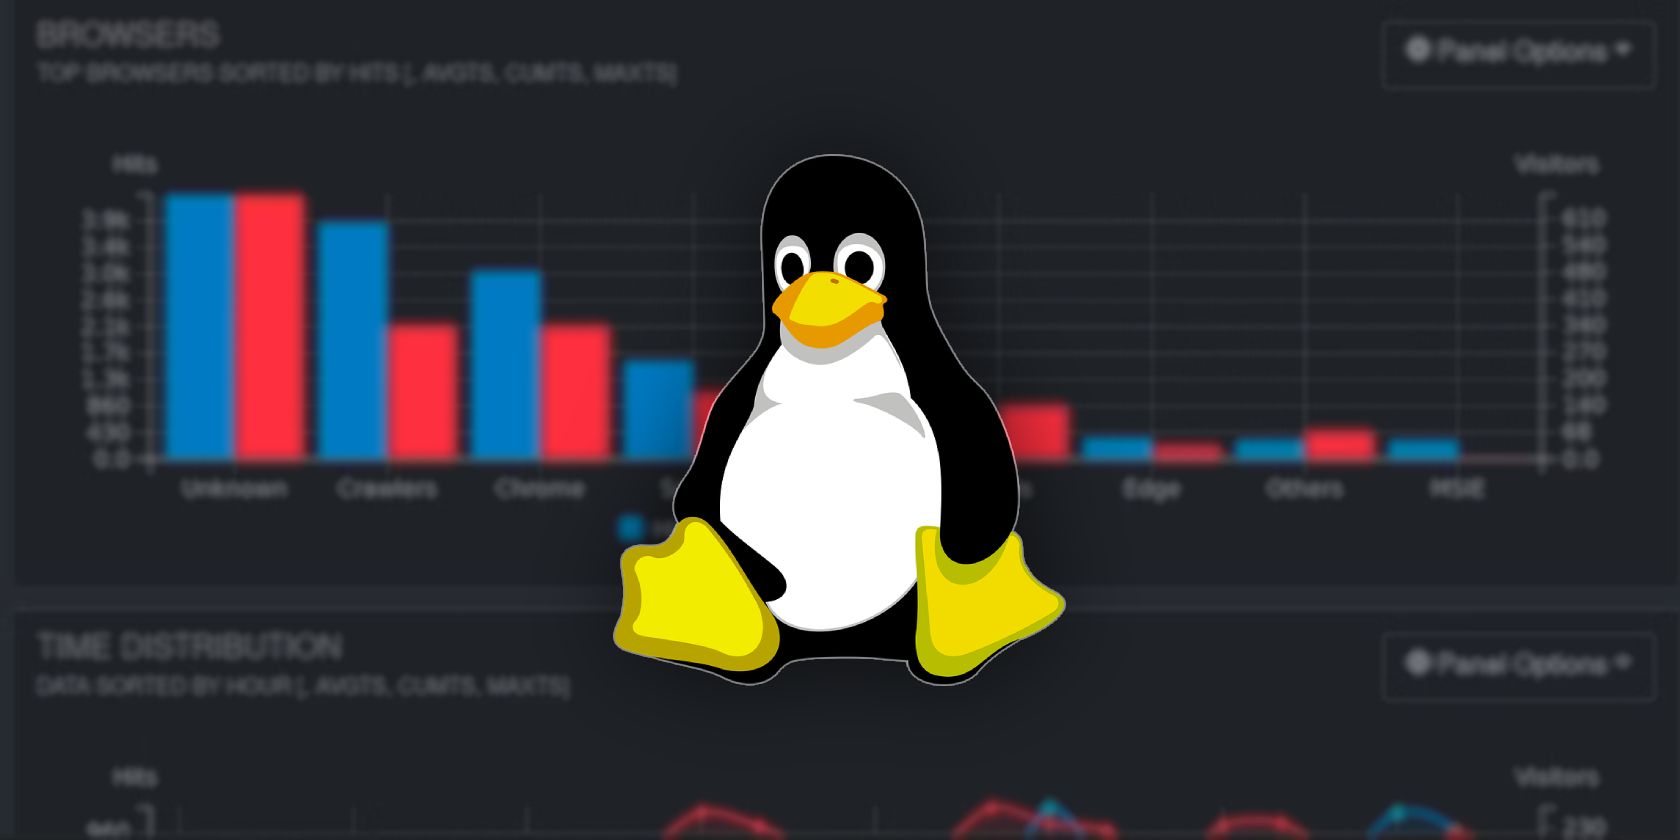 Easily Analyse Your Website Traffic From the Linux Terminal With GoAccess